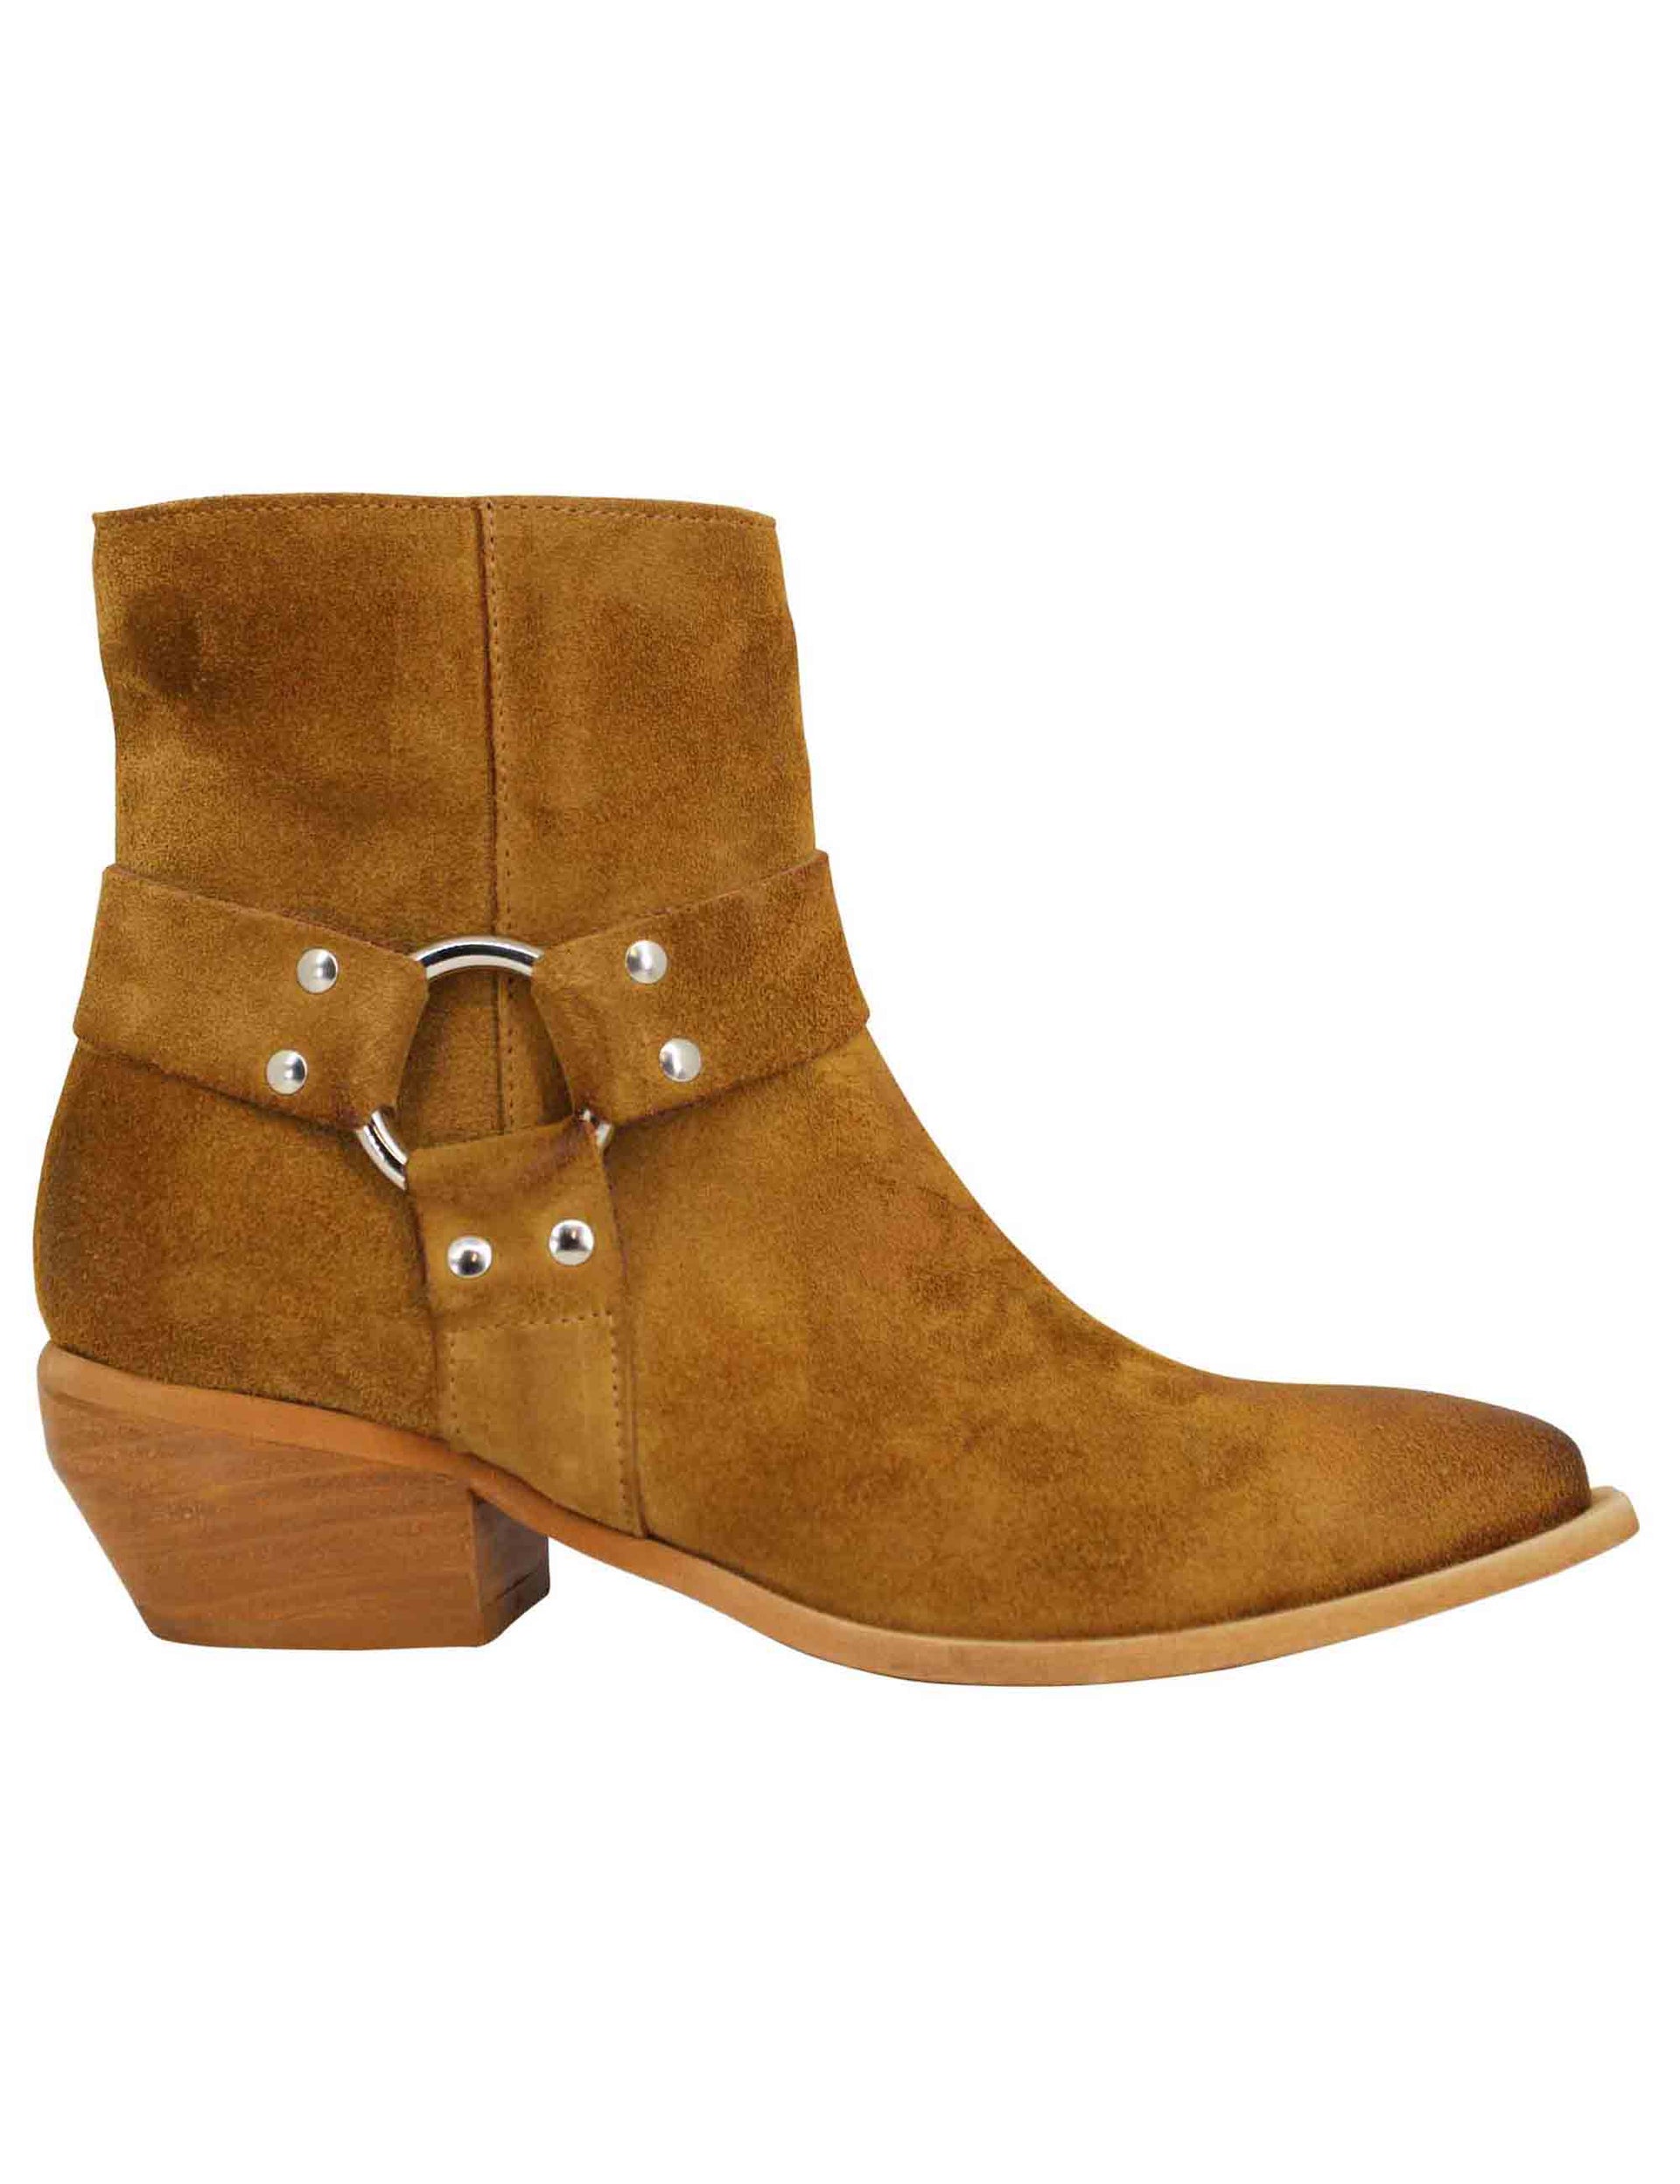 Women's Texan boots in vintage leather suede with side accessory